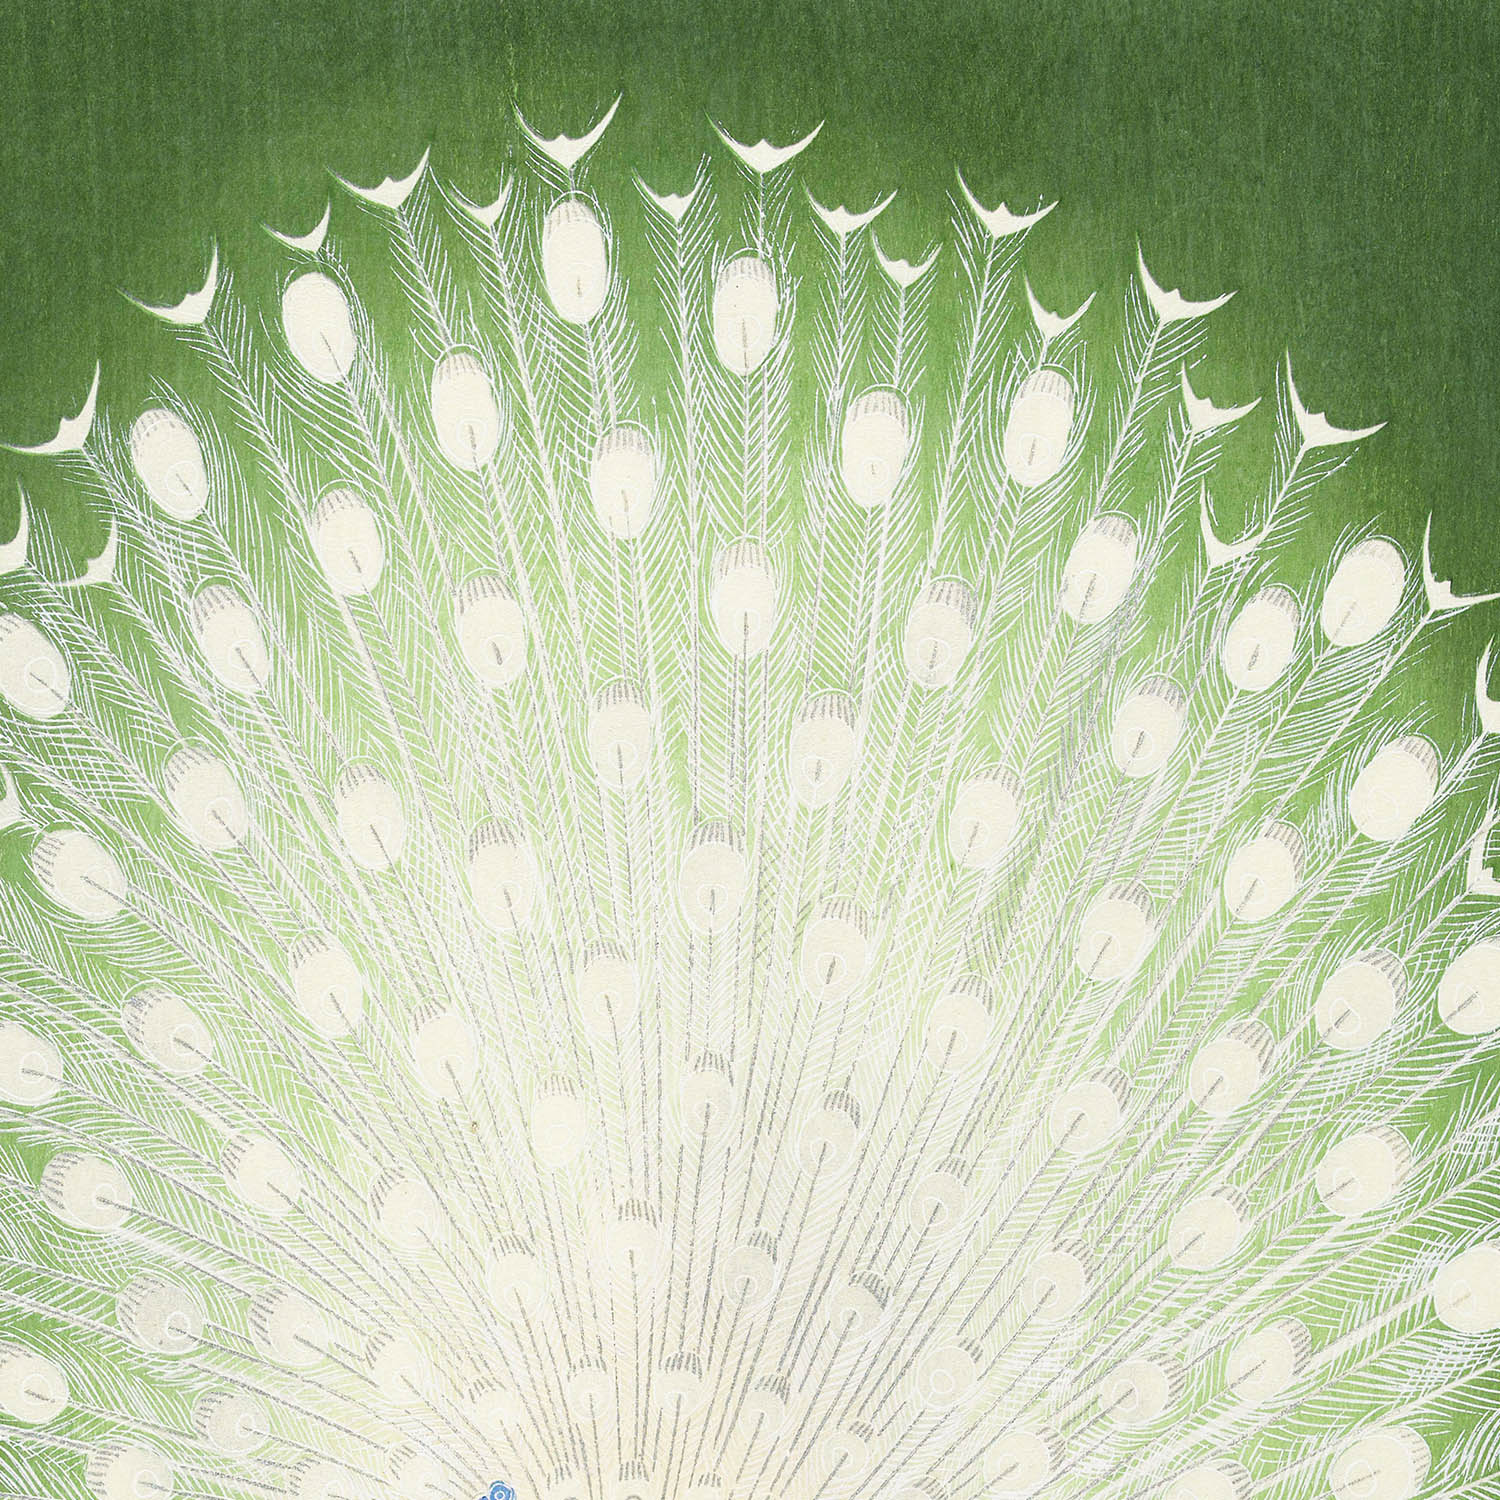 Emerald Green and White Peacock Art Print Close Up Detail Shot 2